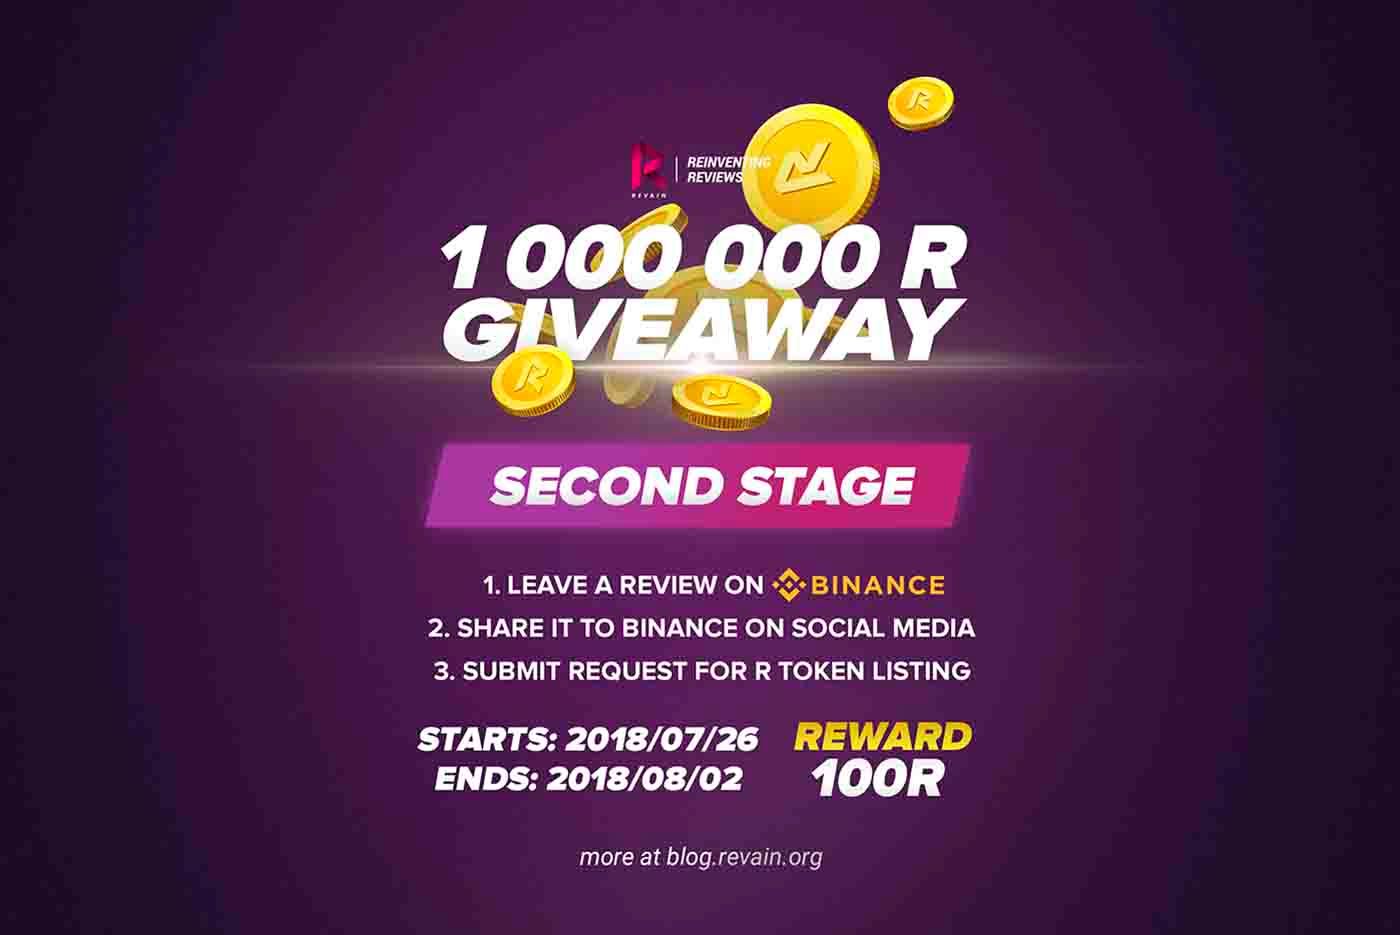 Revain is launching giveaway with a 1 000 000 R tokens total award